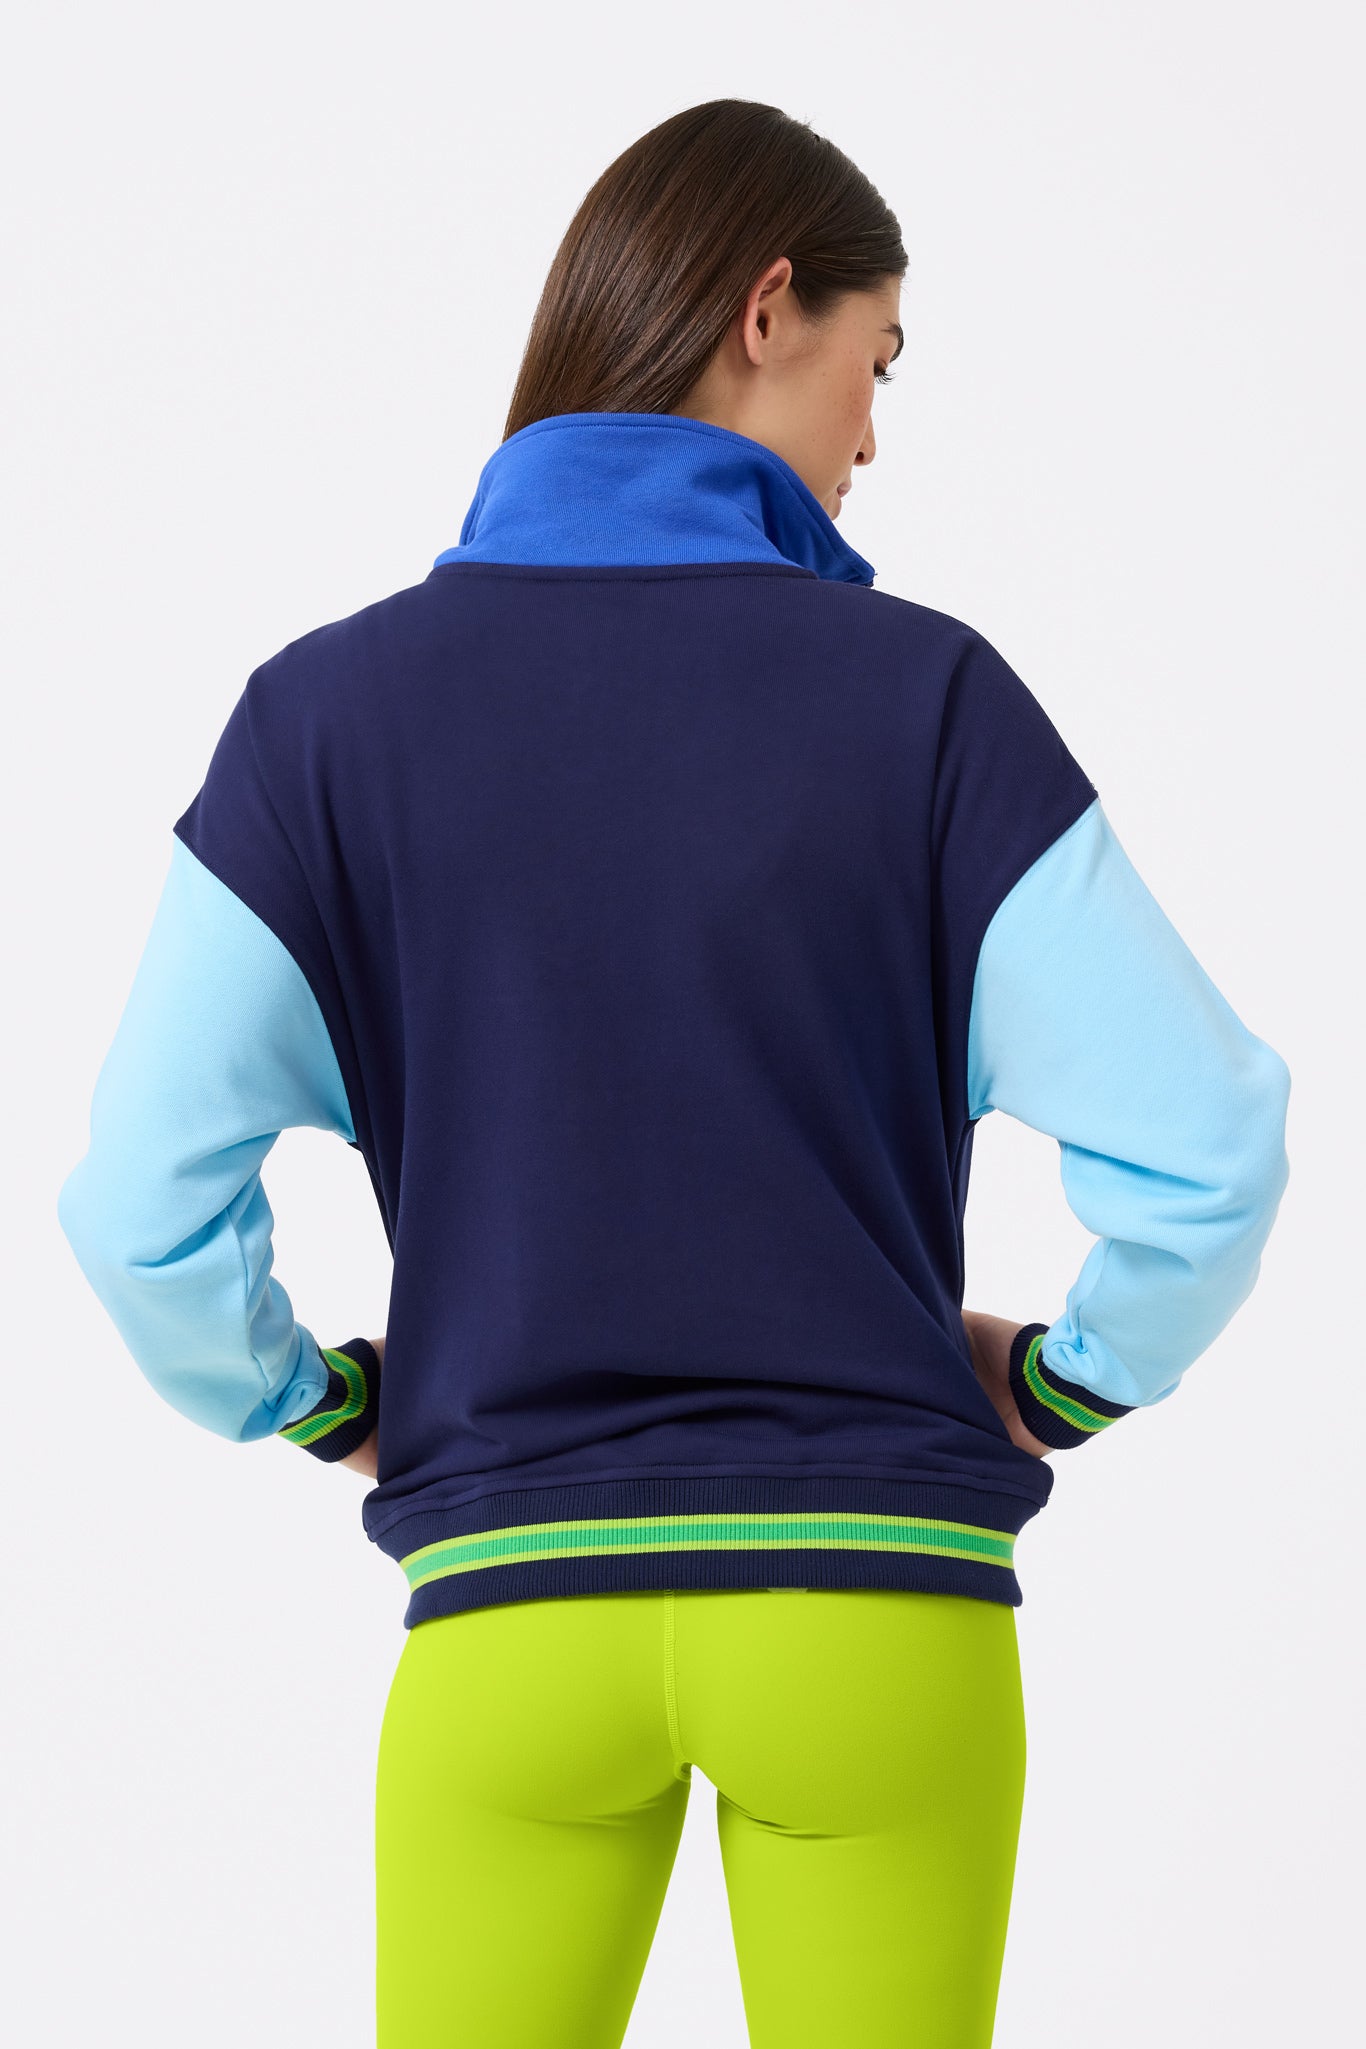 Colorblock Quarter Zip Sweatshirt in Navy, Electric Blue and Cotton Candy